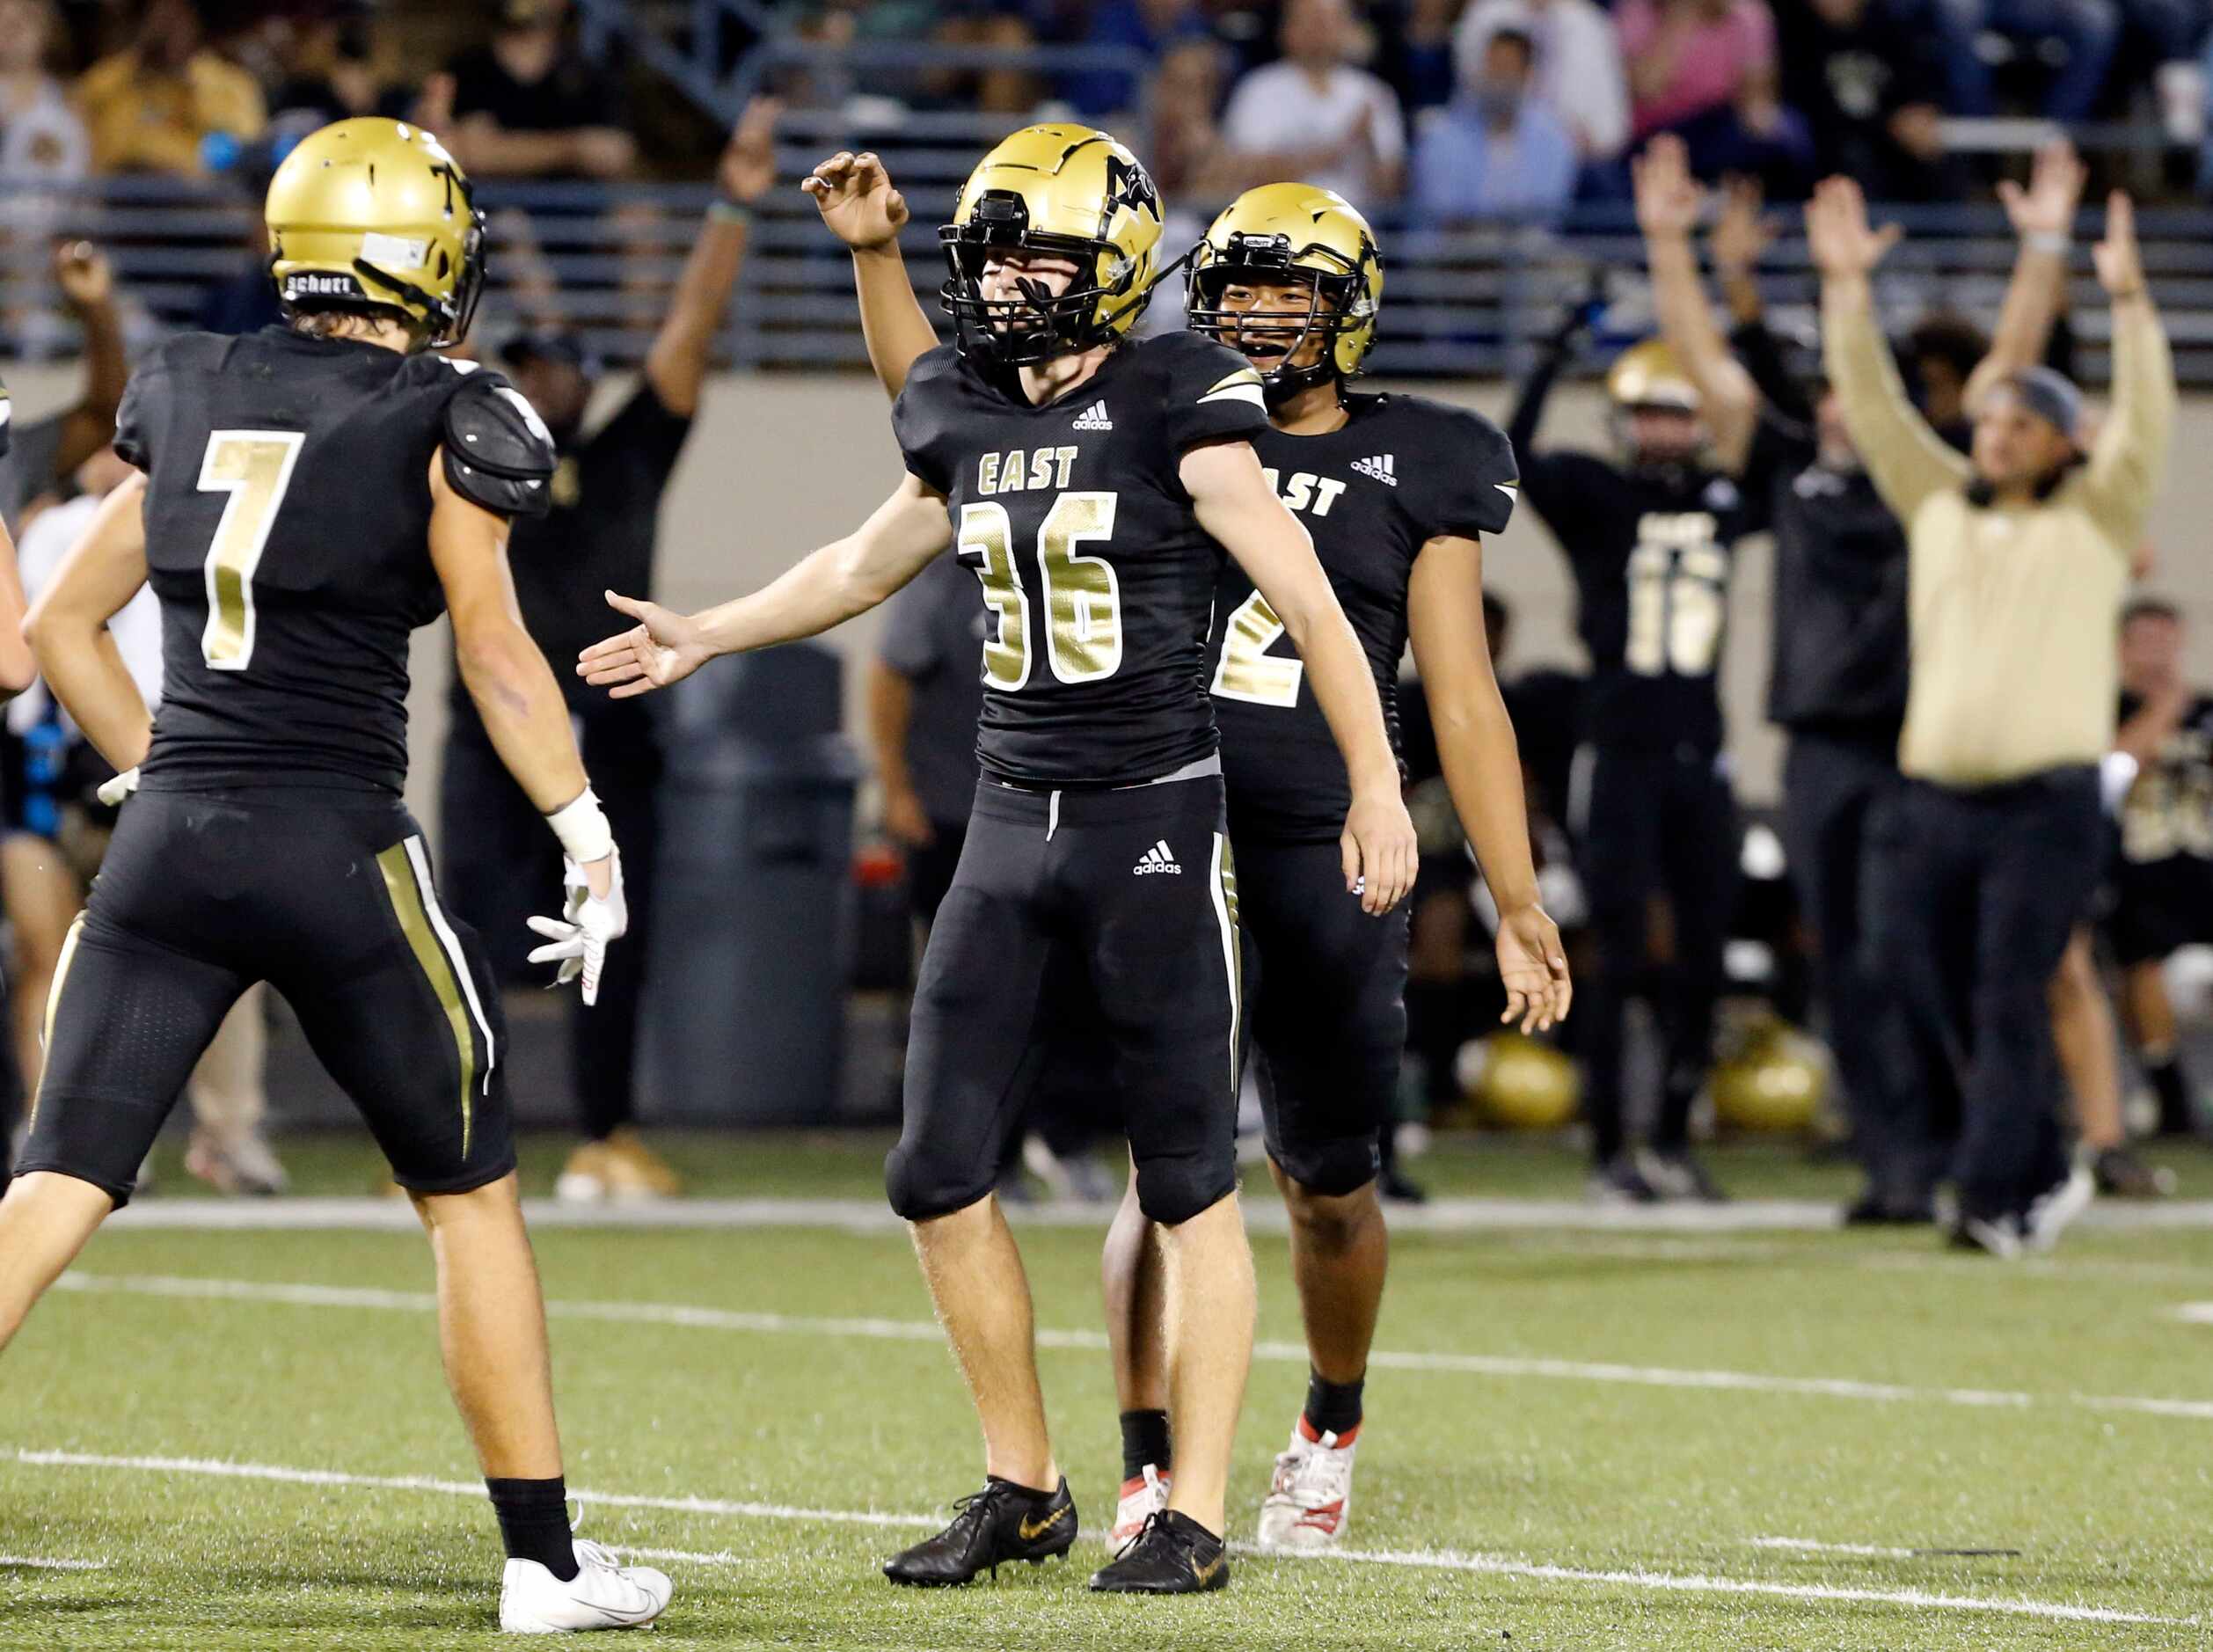 Plano East kicker Buss Flabiano (36) is congratulated by teammates after kicking a...